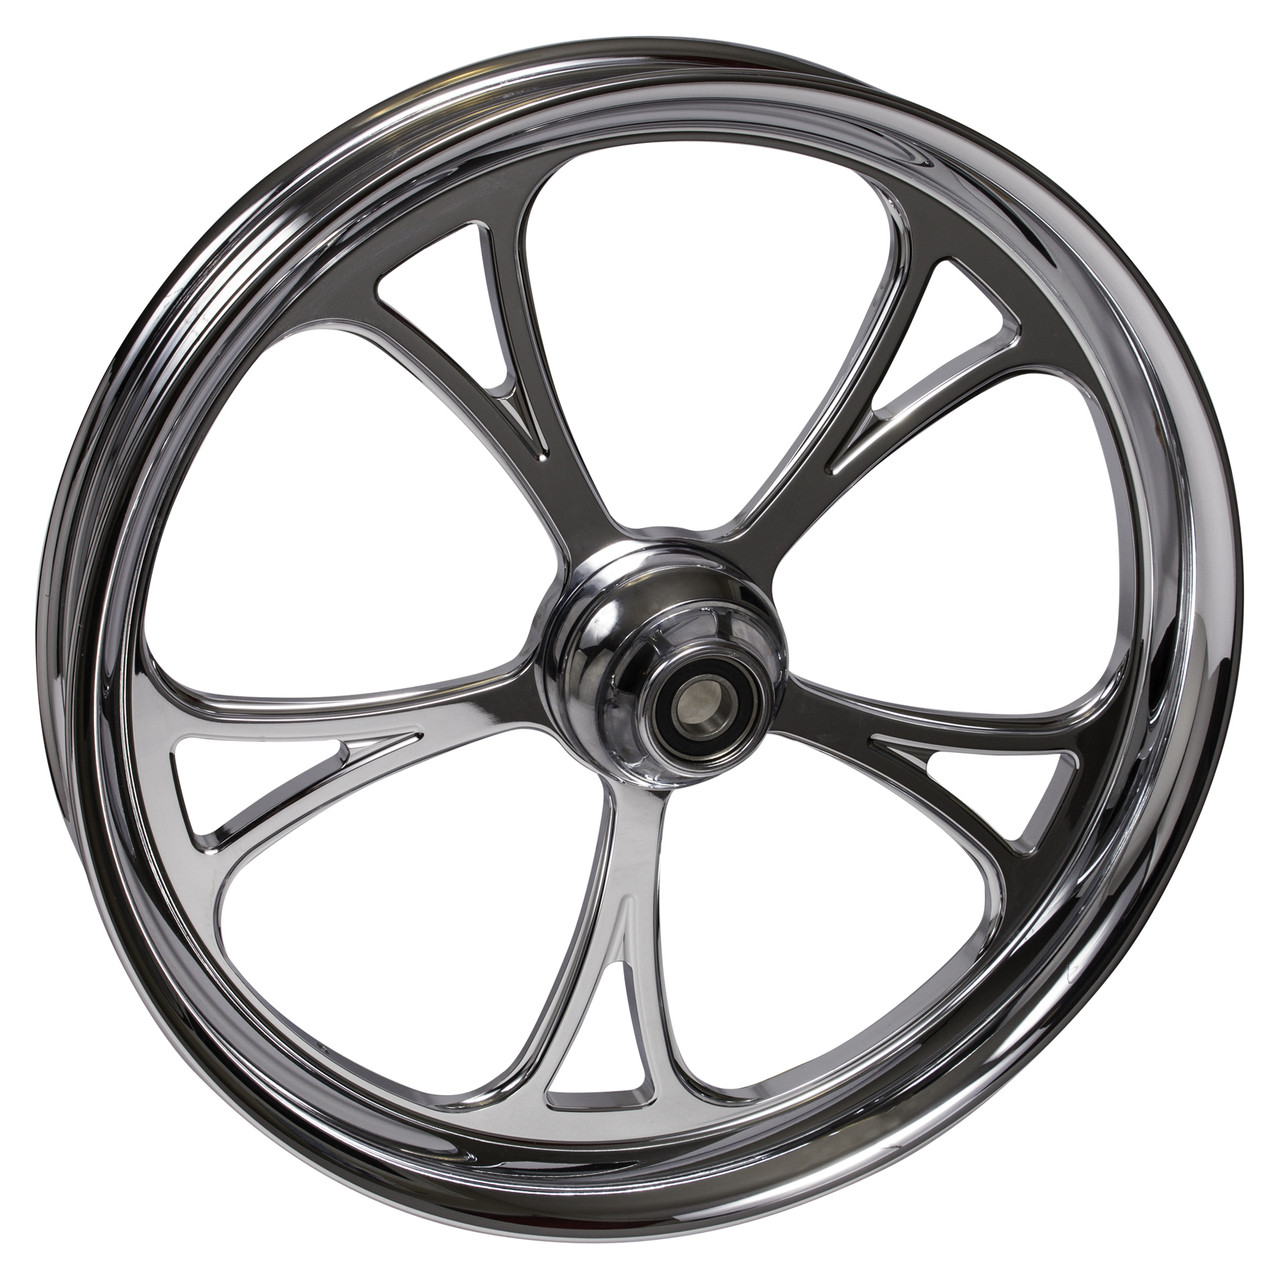 Indian Chieftain Motorcycle Wheels Cyclone